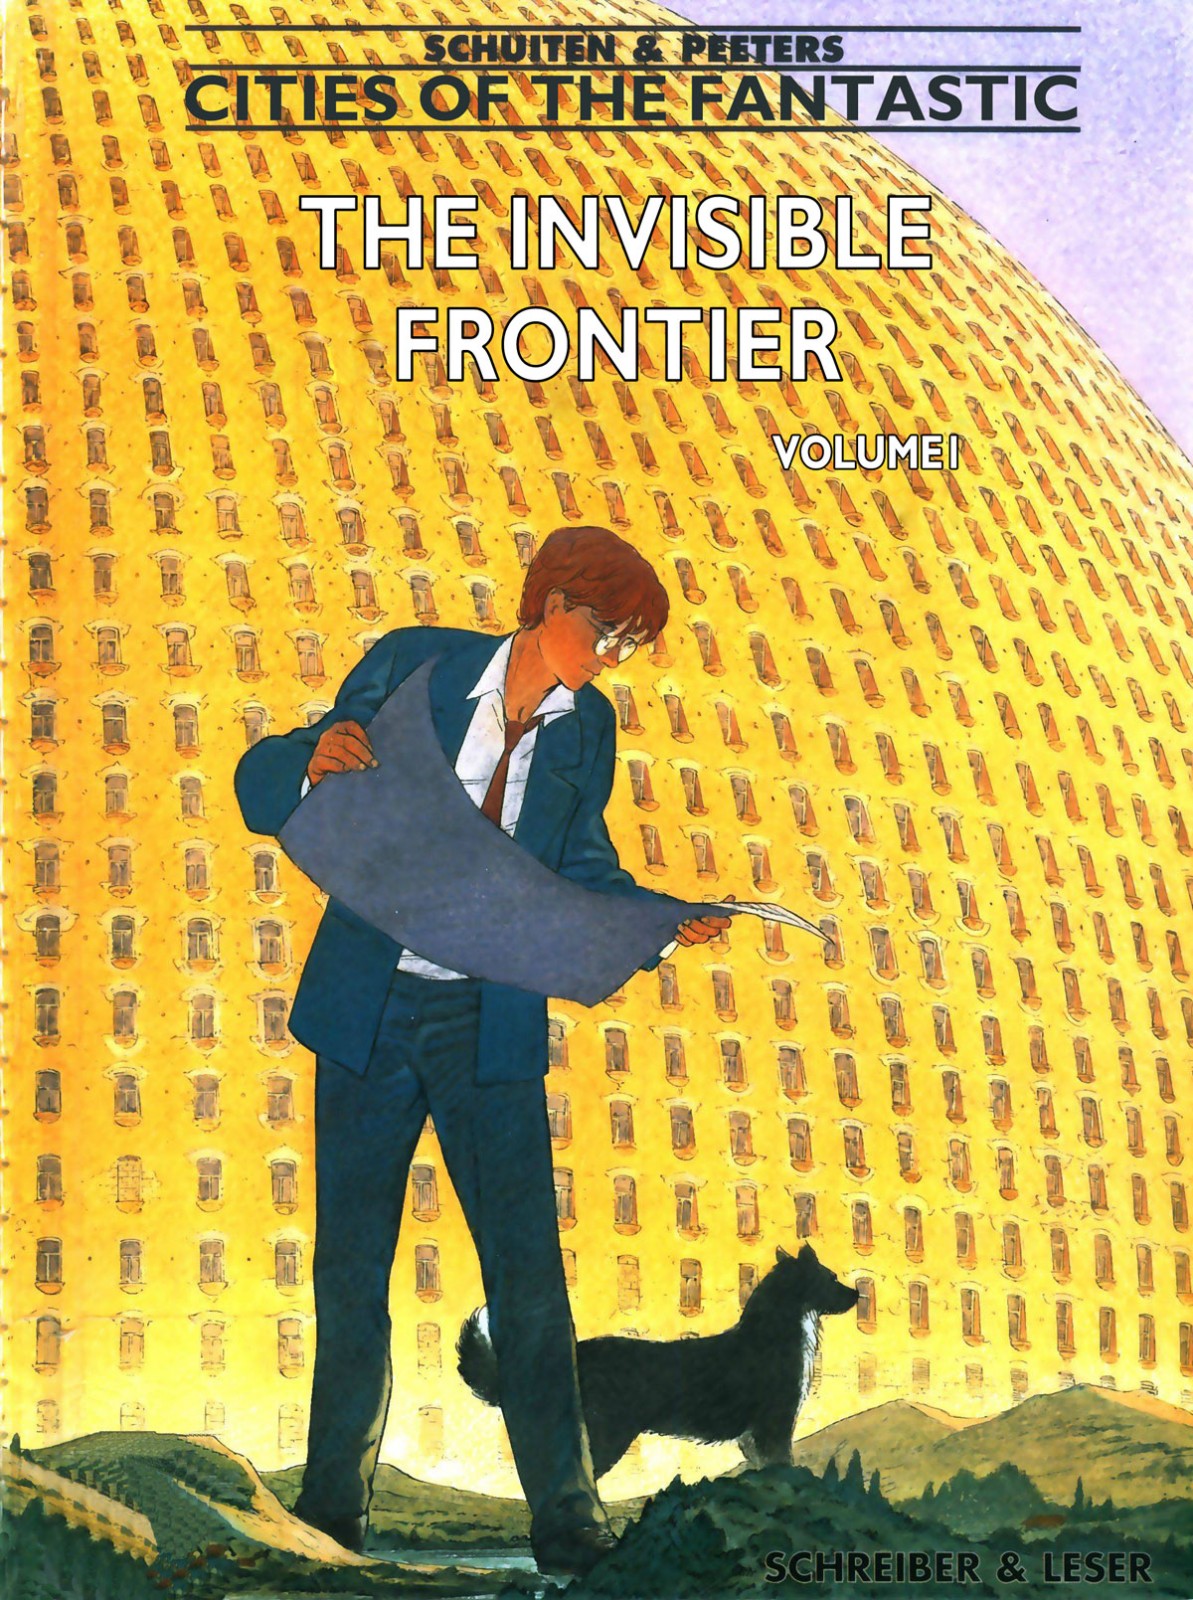 The Invisible Frontier Vol 1